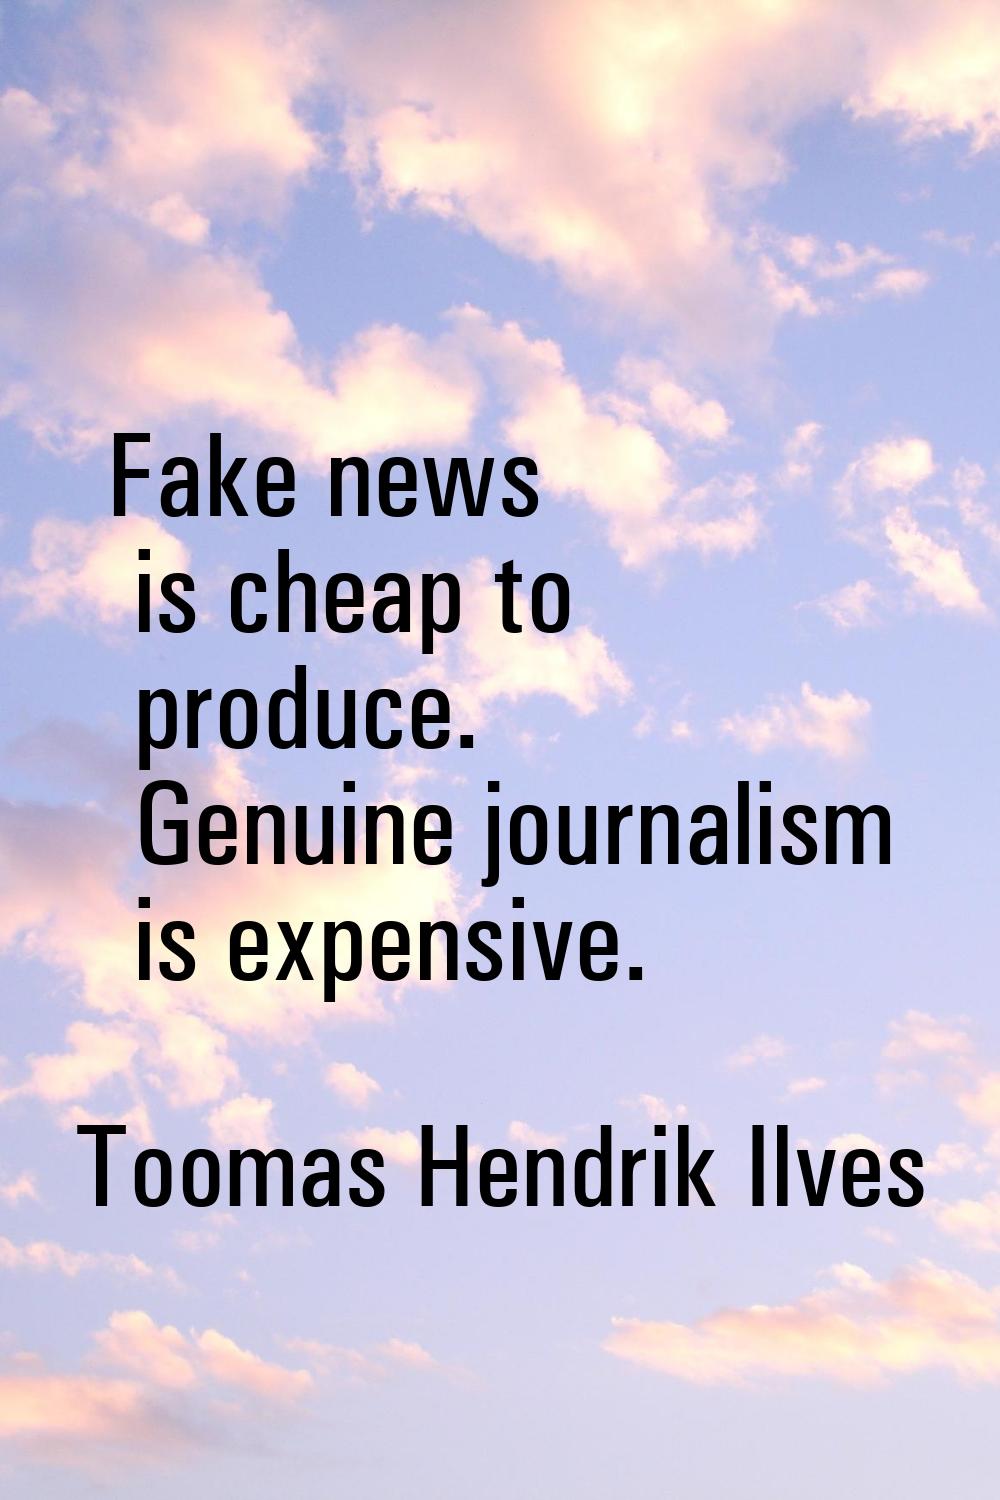 Fake news is cheap to produce. Genuine journalism is expensive.